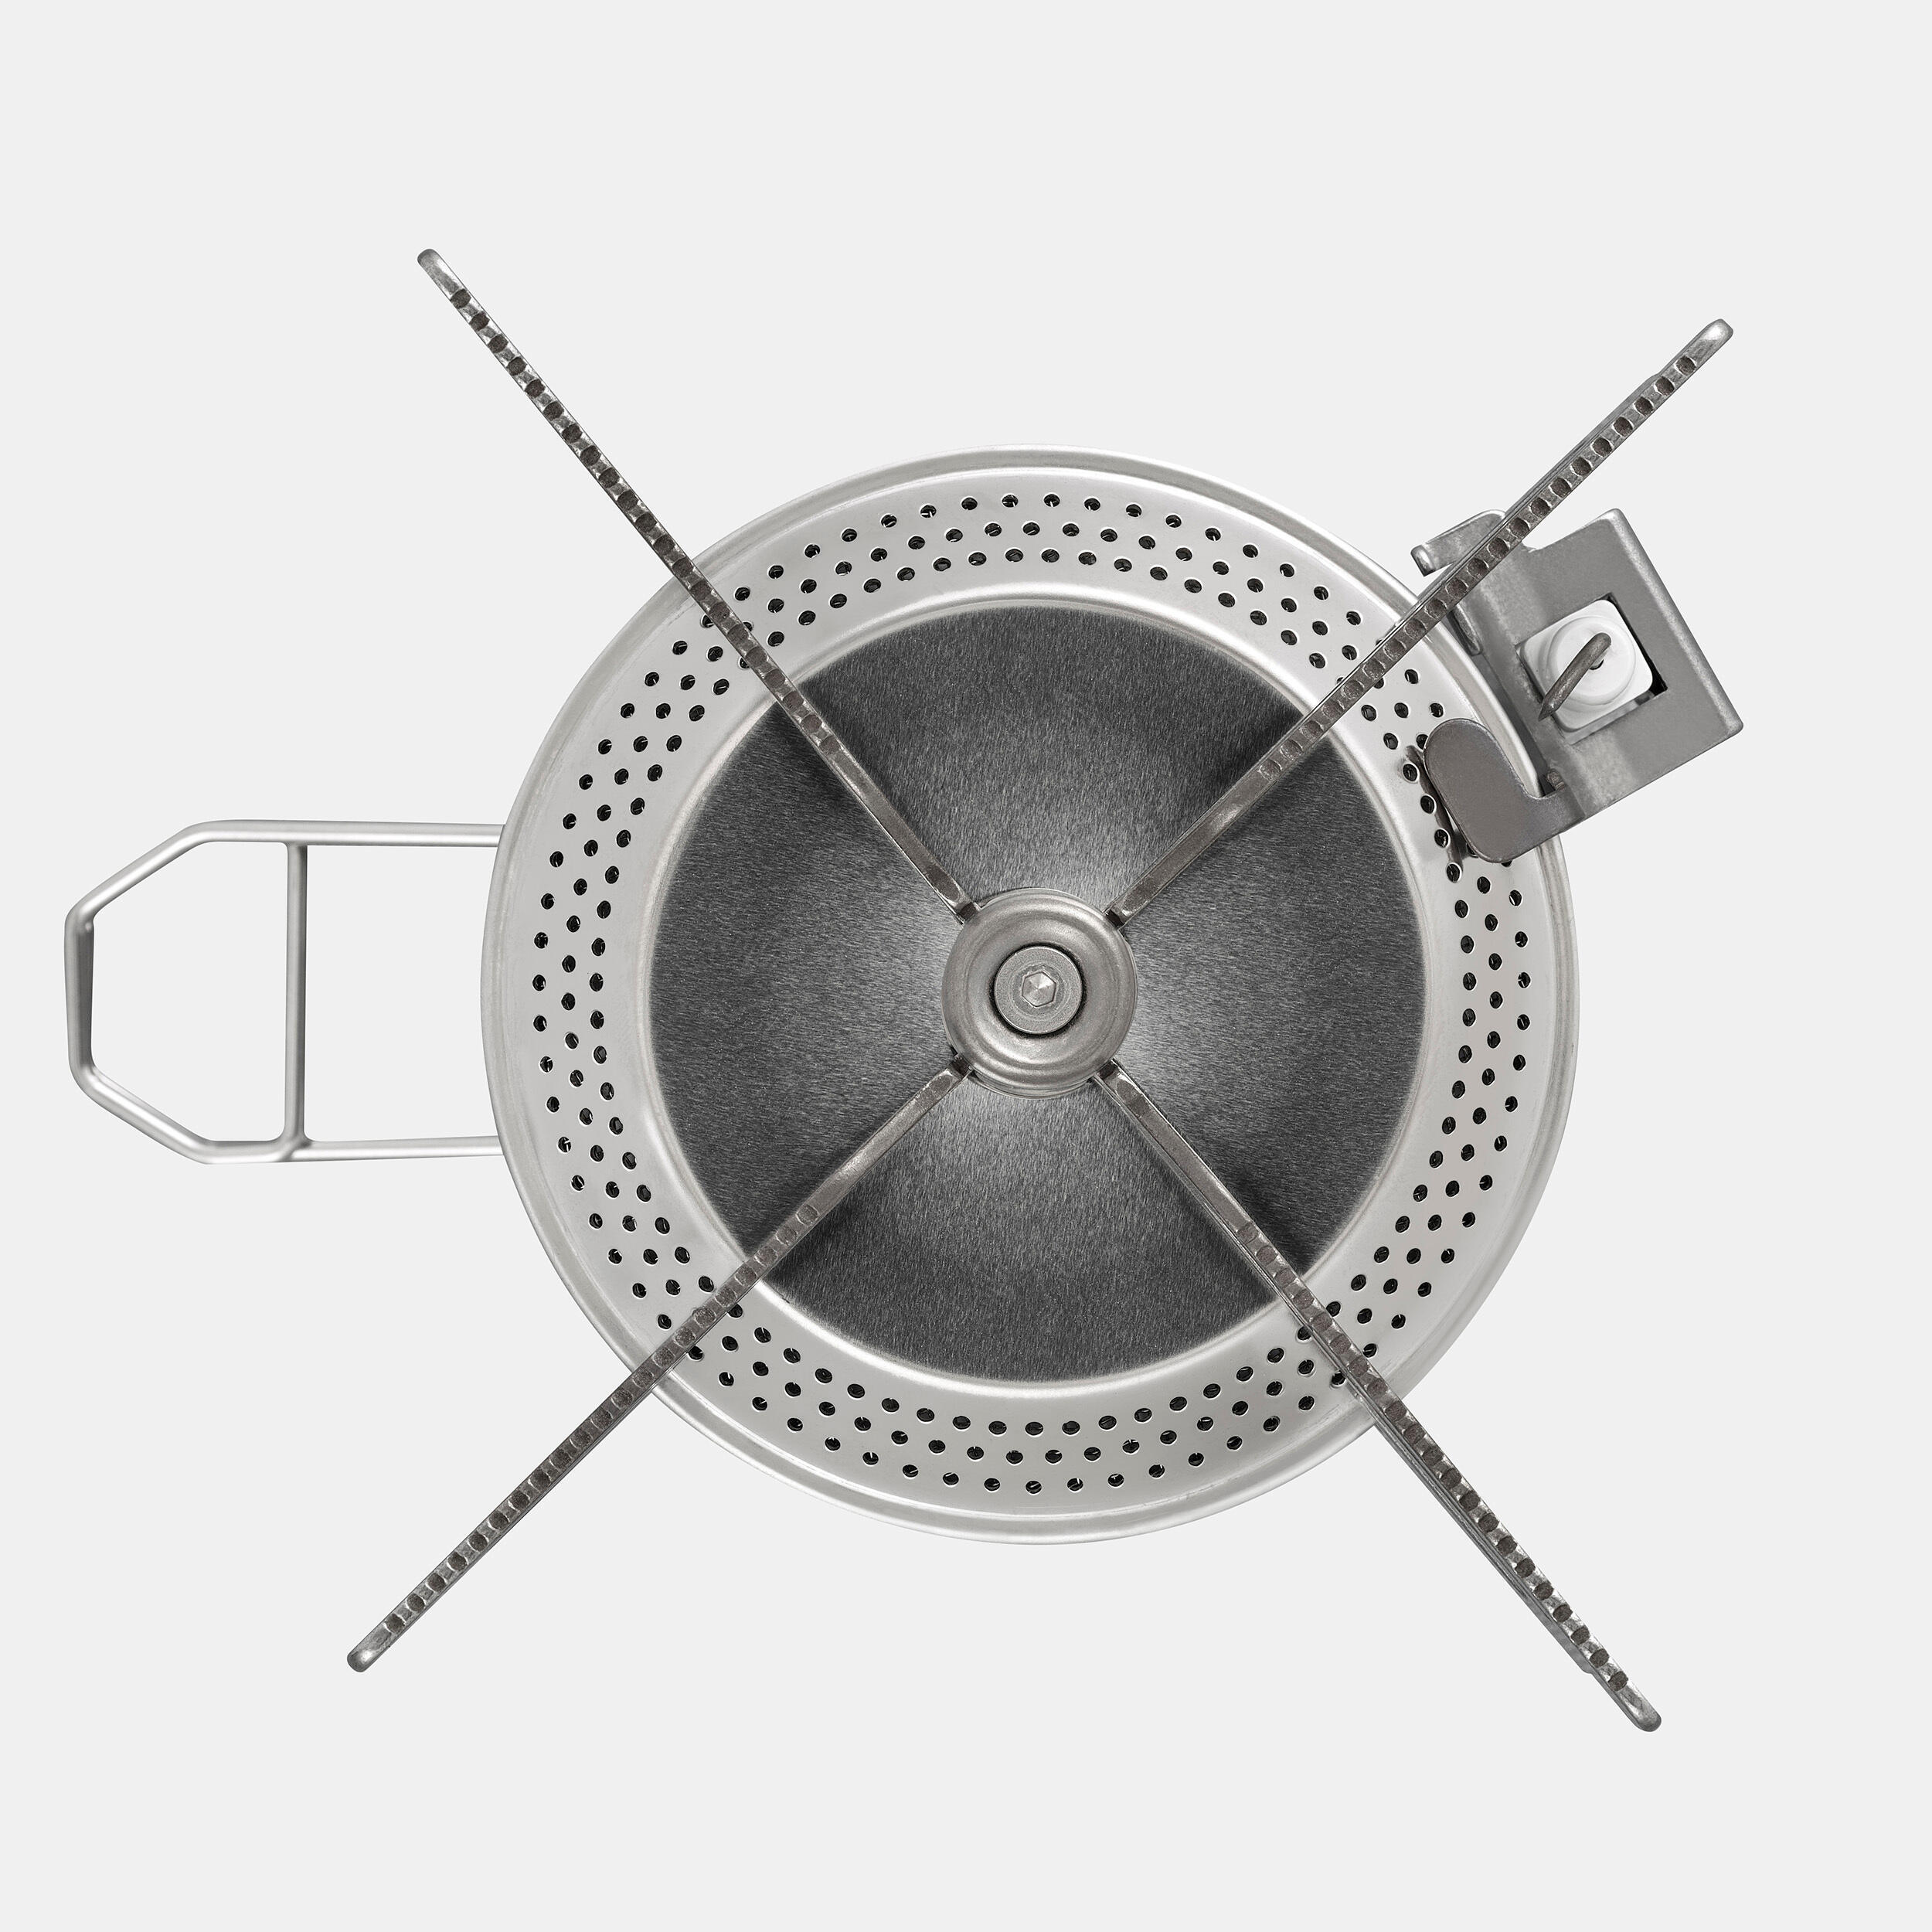 Gas stove with lighter - MT100 5/9